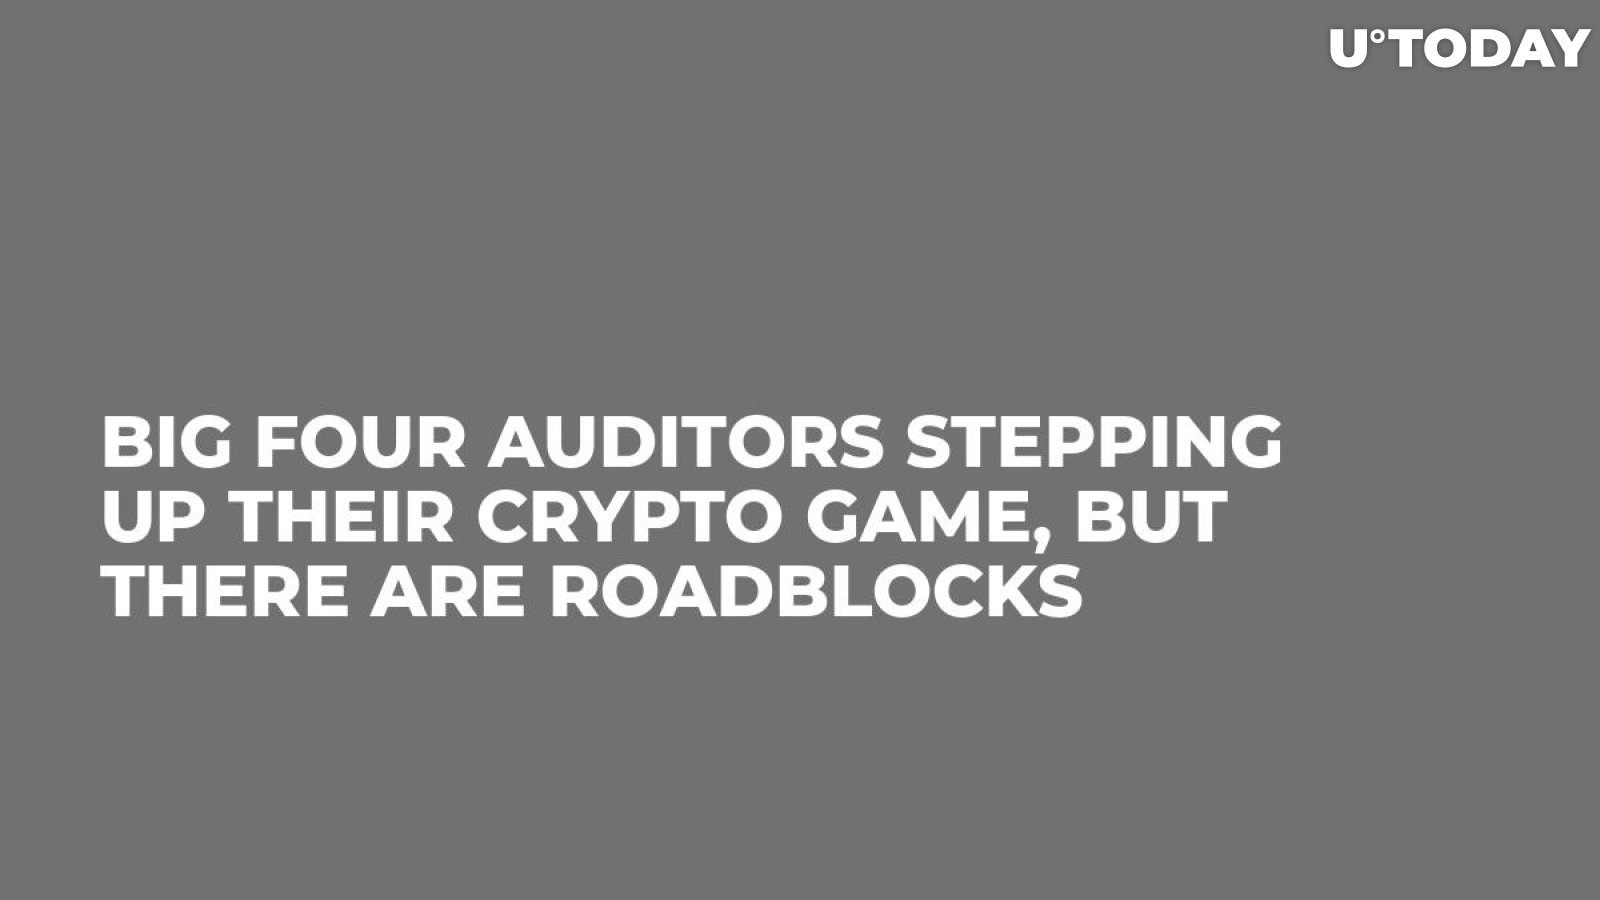 Big Four Auditors Stepping Up Their Crypto Game, But There Are Roadblocks